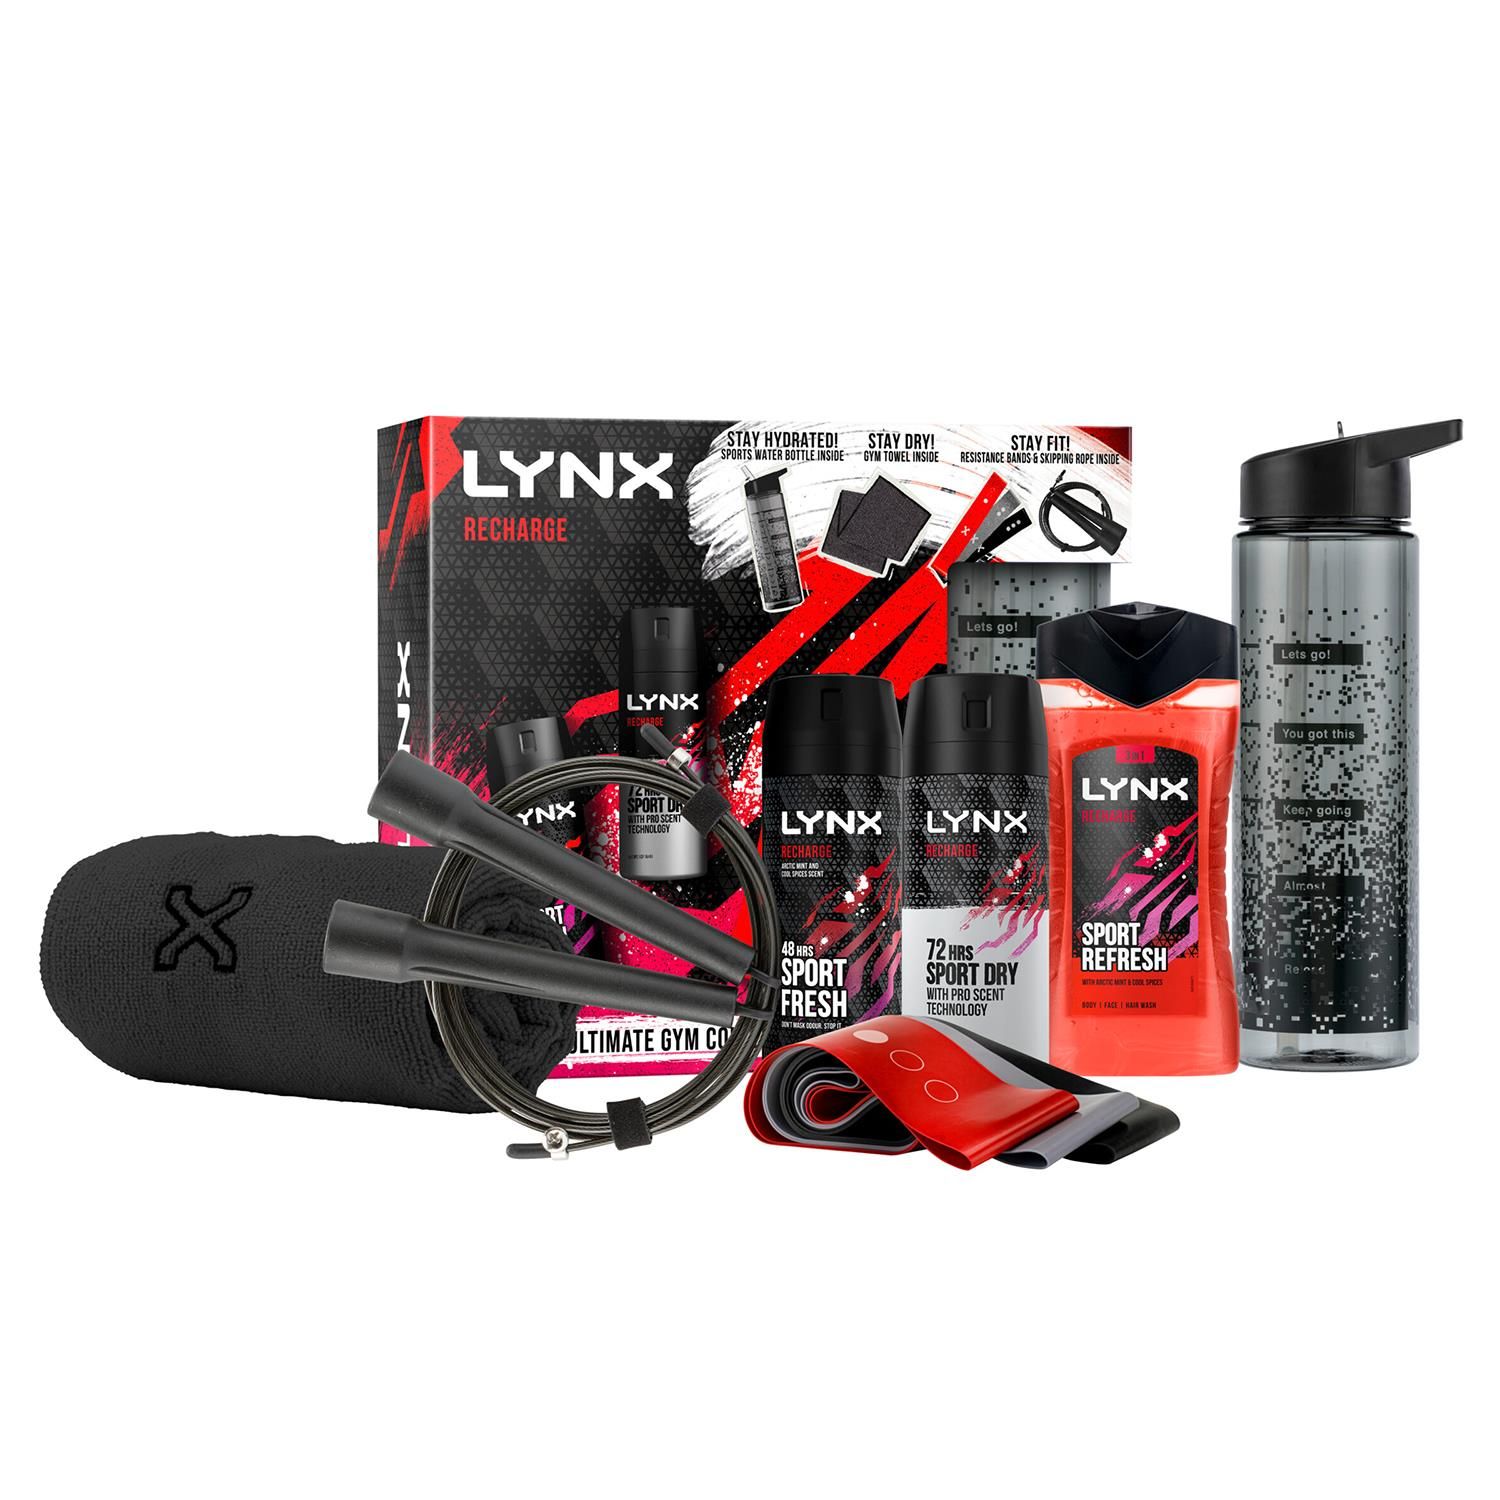 So, you need to get him a gift. Something he'll actually use. Something like... a LYNX Gift Set. A gift so popular it's a living legend. LYNX Recharge Bodyspray helps him feel sport-fresh all day, every day. Our new, revolutionary dual-action technology fights odour-causing bacteria to help him bust odour and smell incredible for 48 hours. LYNX Recharge Bodywash kicks odour to the kerb with the power of plant-based prebiotics, leaving him to decide how to play his 12 hours of freshness. Plus, it contains 5x more moisturisers and 92% natural origin ingredients for naturally soft skin. Developed using our unique pro-scent technology, LYNX Recharge Antiperspirant guarantees up to 72 hours of dryness, protecting against wetness and odour before they even start. These gifts for men are complemented by three resistance loop bands - perfect to get him squatting, stretching, and lunging his way to fitness; a LYNX skipping rope - a great option for a full-body workout; and a LYNX water bottle and gym towel to help him stay hydrated and fresh.

Features:
LYNX Recharge Bodyspray 150 ml features an energising combination of arctic mint & cooling spices that offers 48 hours of high-definition fragrance and protects against body odour
LYNX Recharge Bodywash 225 ml works as a 3 in 1 body, face and hair wash that leaves him feeling and smelling recharged
LYNX Recharge Antiperspirant Deodorant 150 ml gives him 72-hour protection against sweat and body odour

Safety Warning:
Body Spray: Stop use if rash or irritation occurs. Avoid direct inhalation. Do not spray near your eyes.
Body Wash: Use only as directed. Avoid contact with eyes. If eye contact occurs wash out immediately with warm water. If irritation occurs discontinue use.

Gift set Includes: 
1x Lynx Recharge Body wash 225ml, 
1x Lynx Recharge Antiperspirant Deodorant 150ml, 
1x Lynx Recharge Body Spray 150ml, Lynx Gym Towel, 
1x Lynx Jump Rope, Lynx Resistance Belt, Lynx Water Bottle